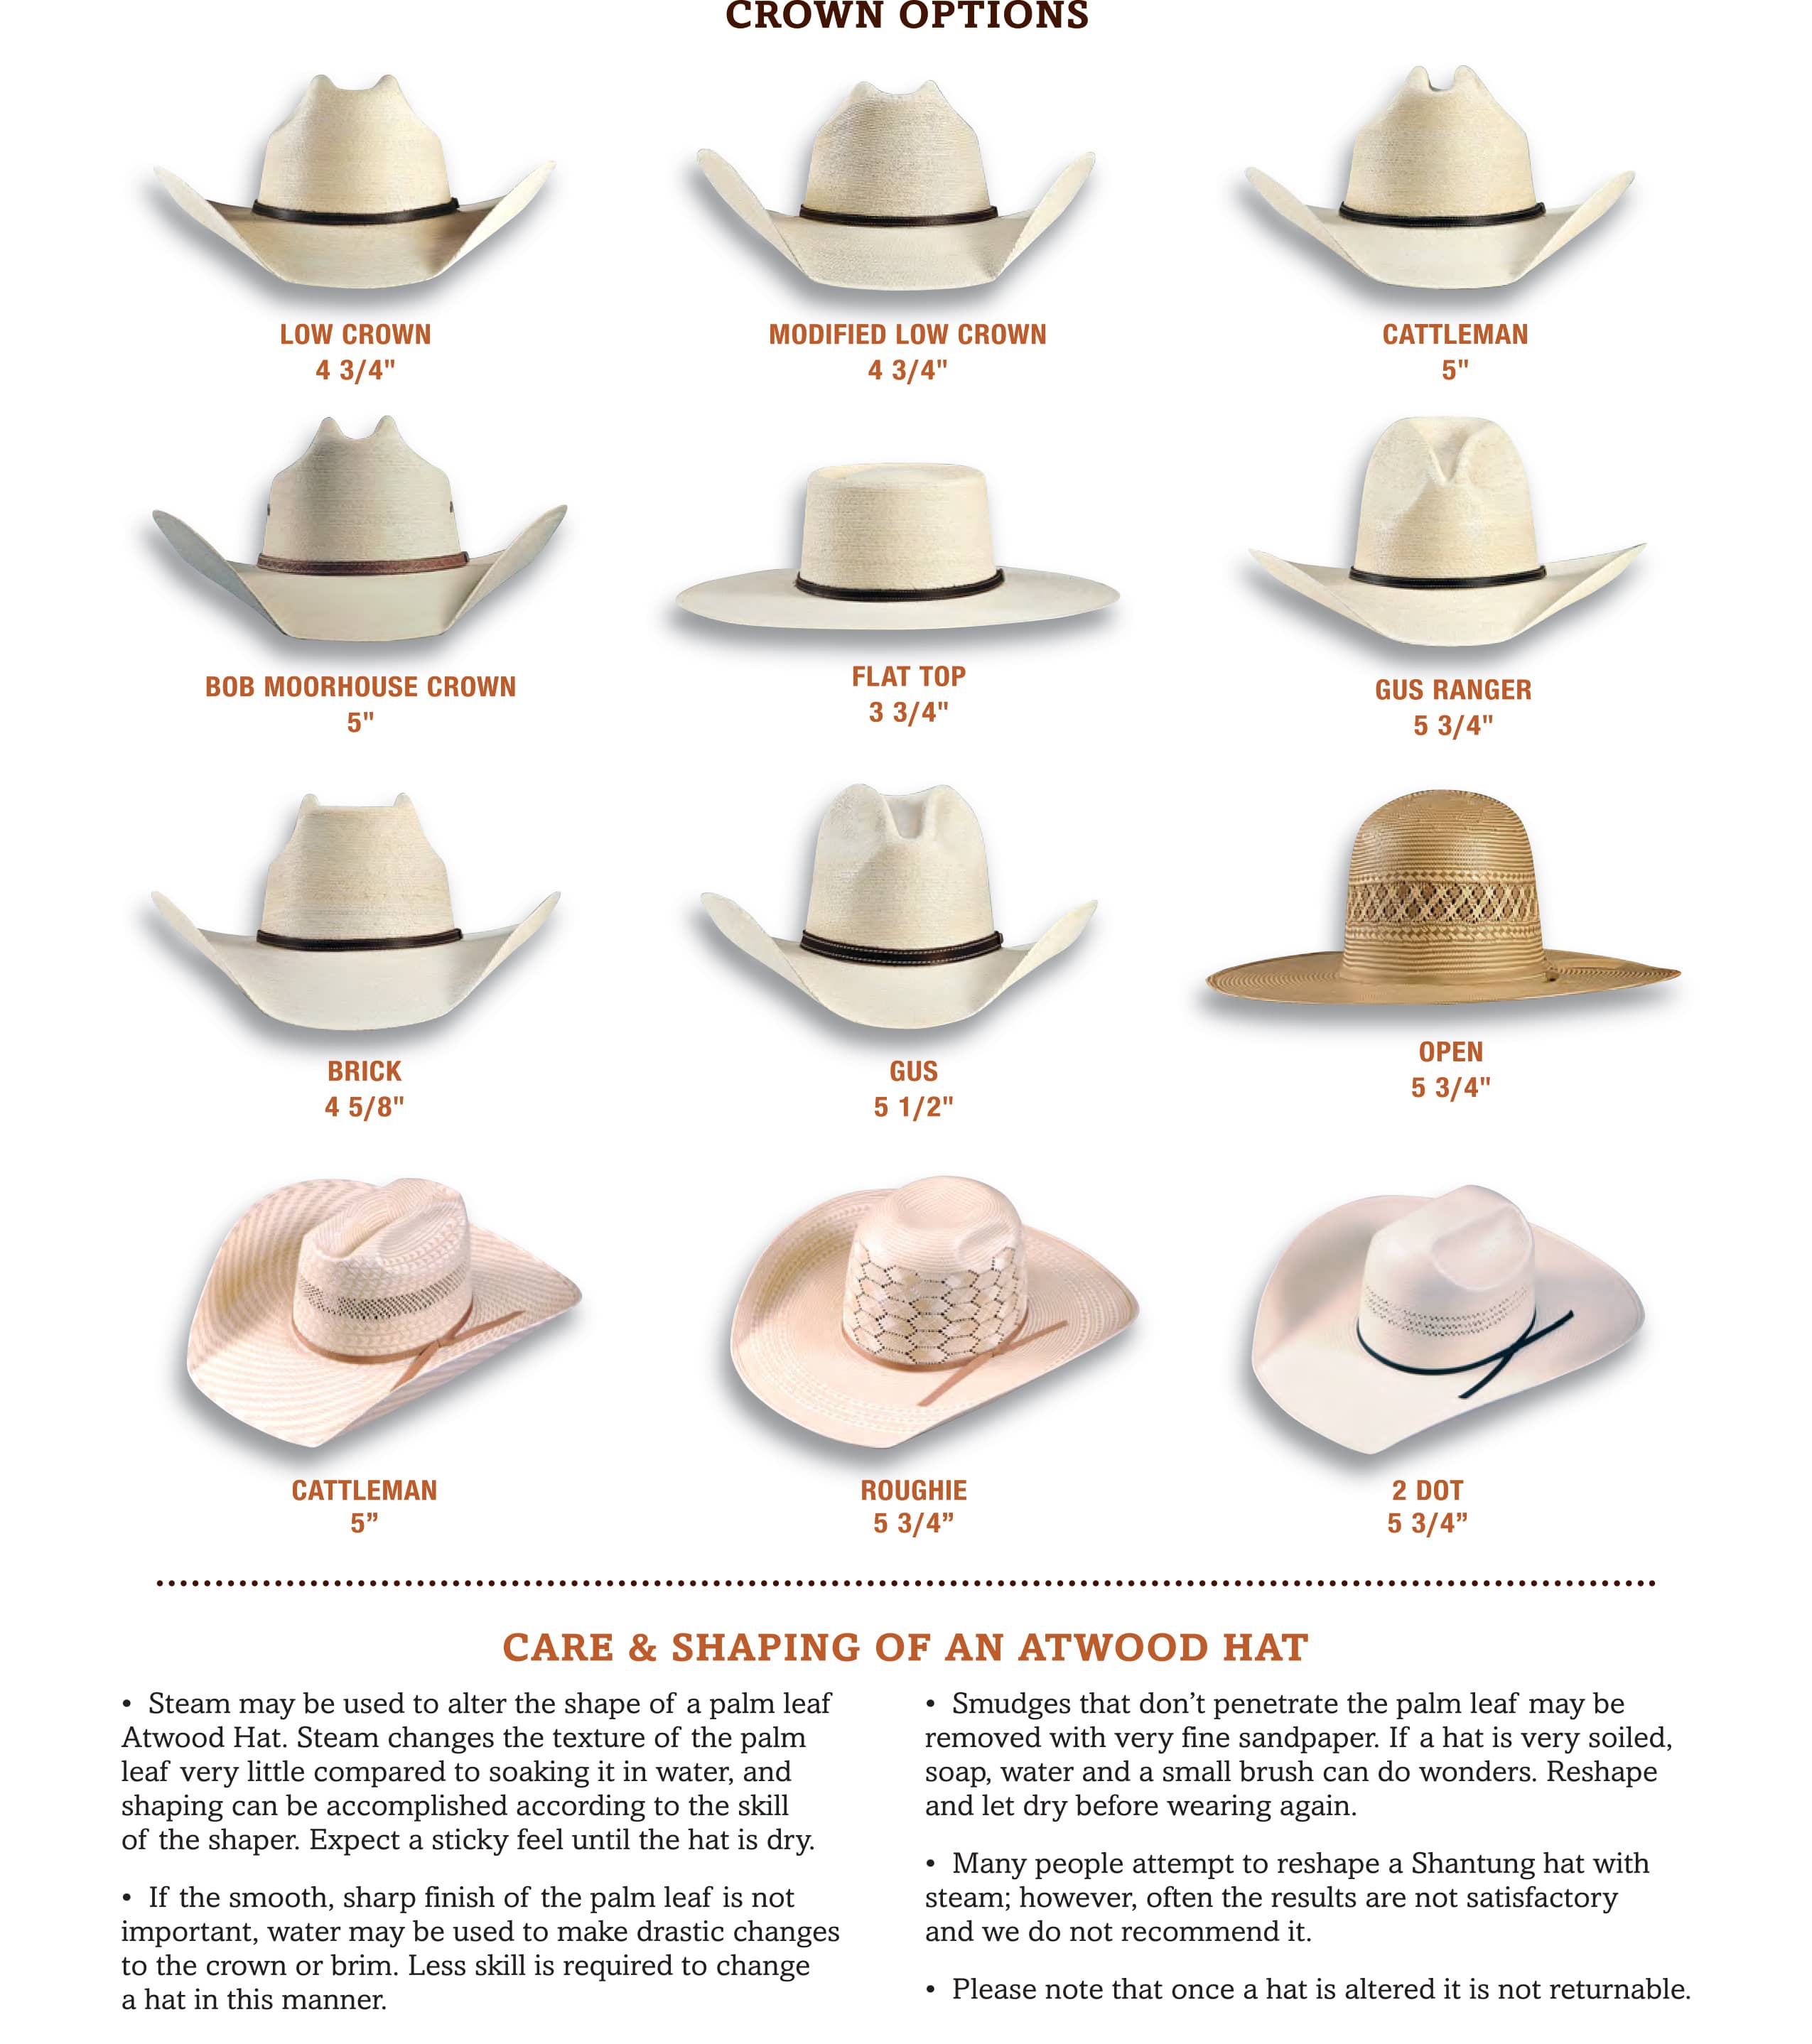 Accessories - Atwood Hat Company - The Hat that Cowboys Wear